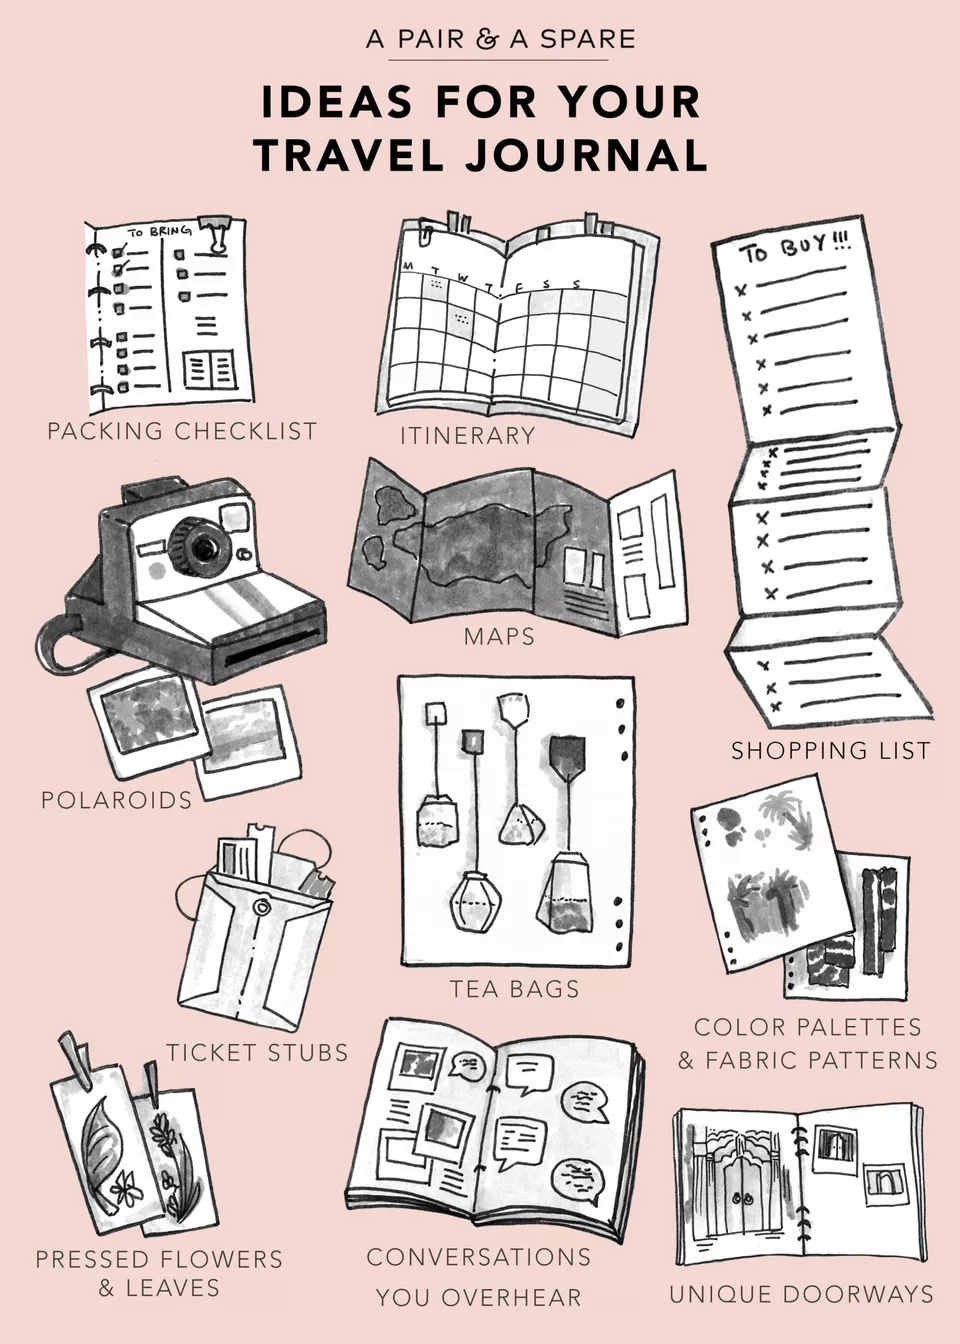  
Ideas for Your Travel Journal from A Pair and a Spare DIY